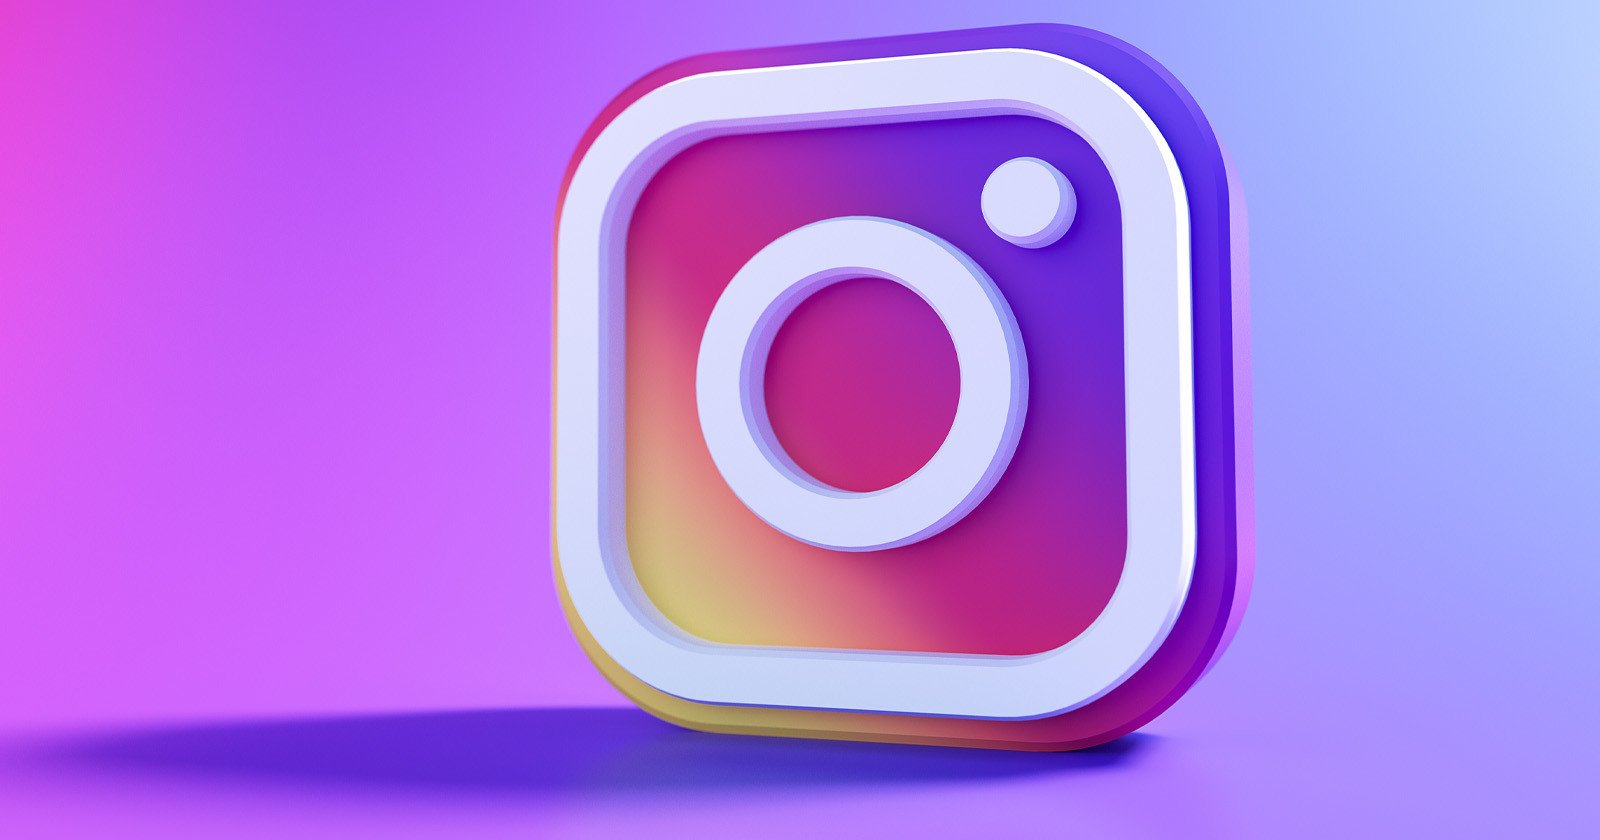  pro instagram accounts can now schedule posts directly 